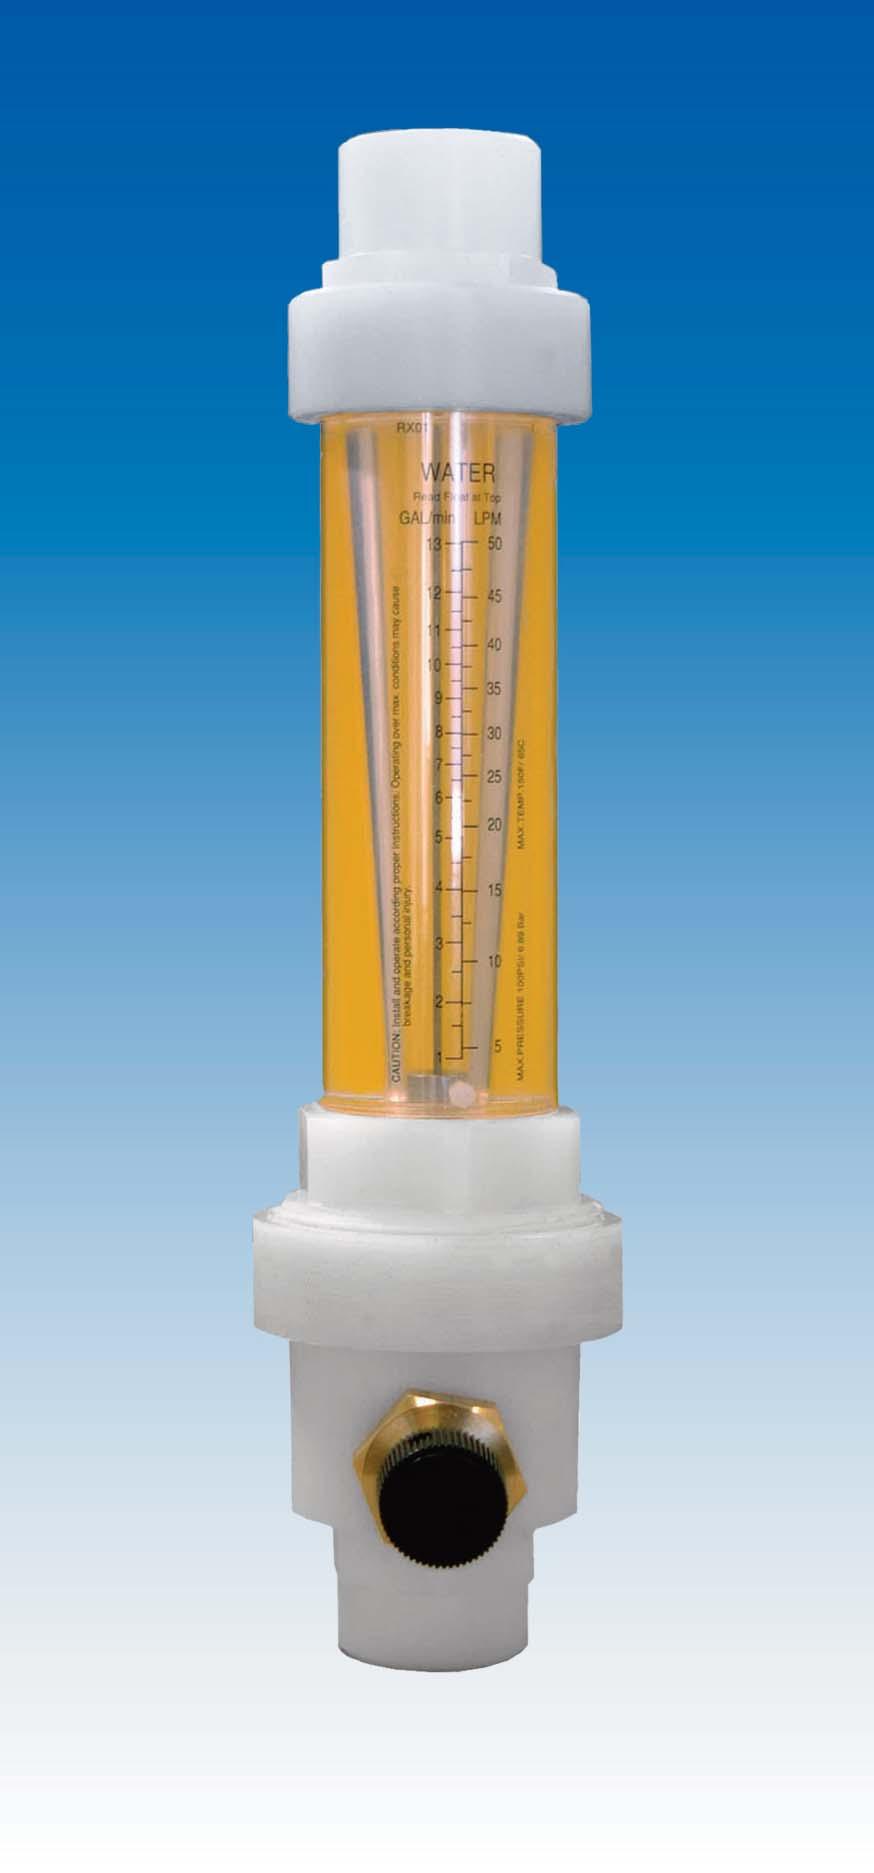 ACRXV ACRXV meters are being offered with any one of the interchangeable direct reading scales for Water, Argon, Oxygen, Carbon Dioxide, Nitrogen and Helium. Multi-turn needle valve is included.